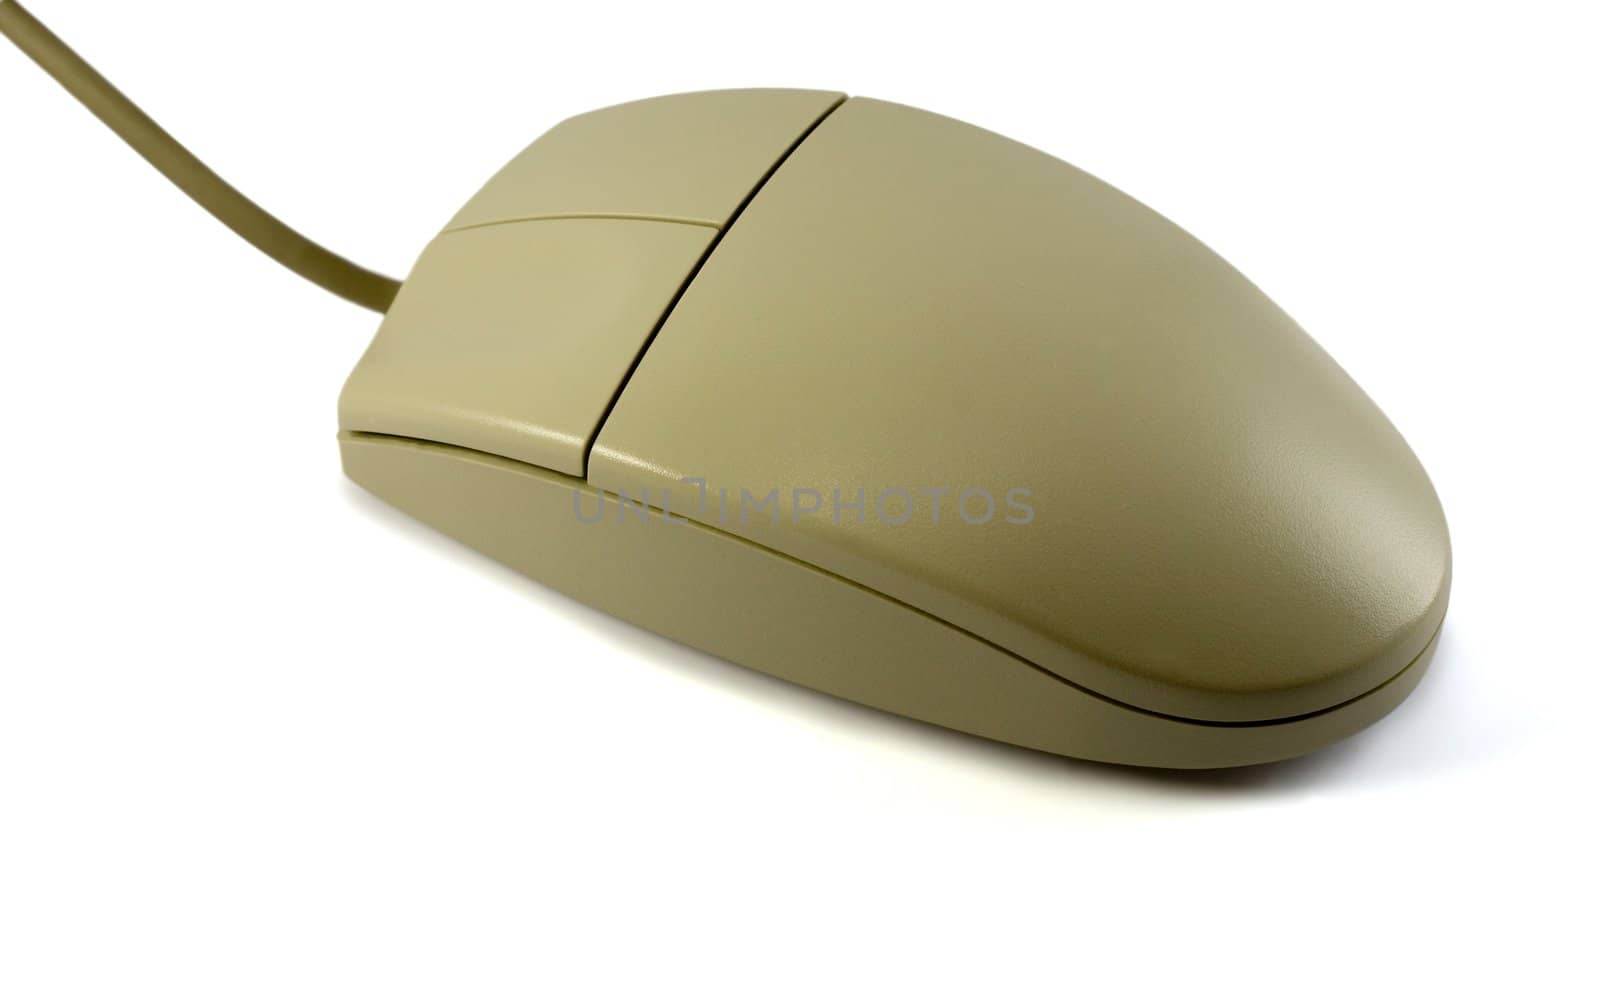 grey computer mouse,isolated on a white background